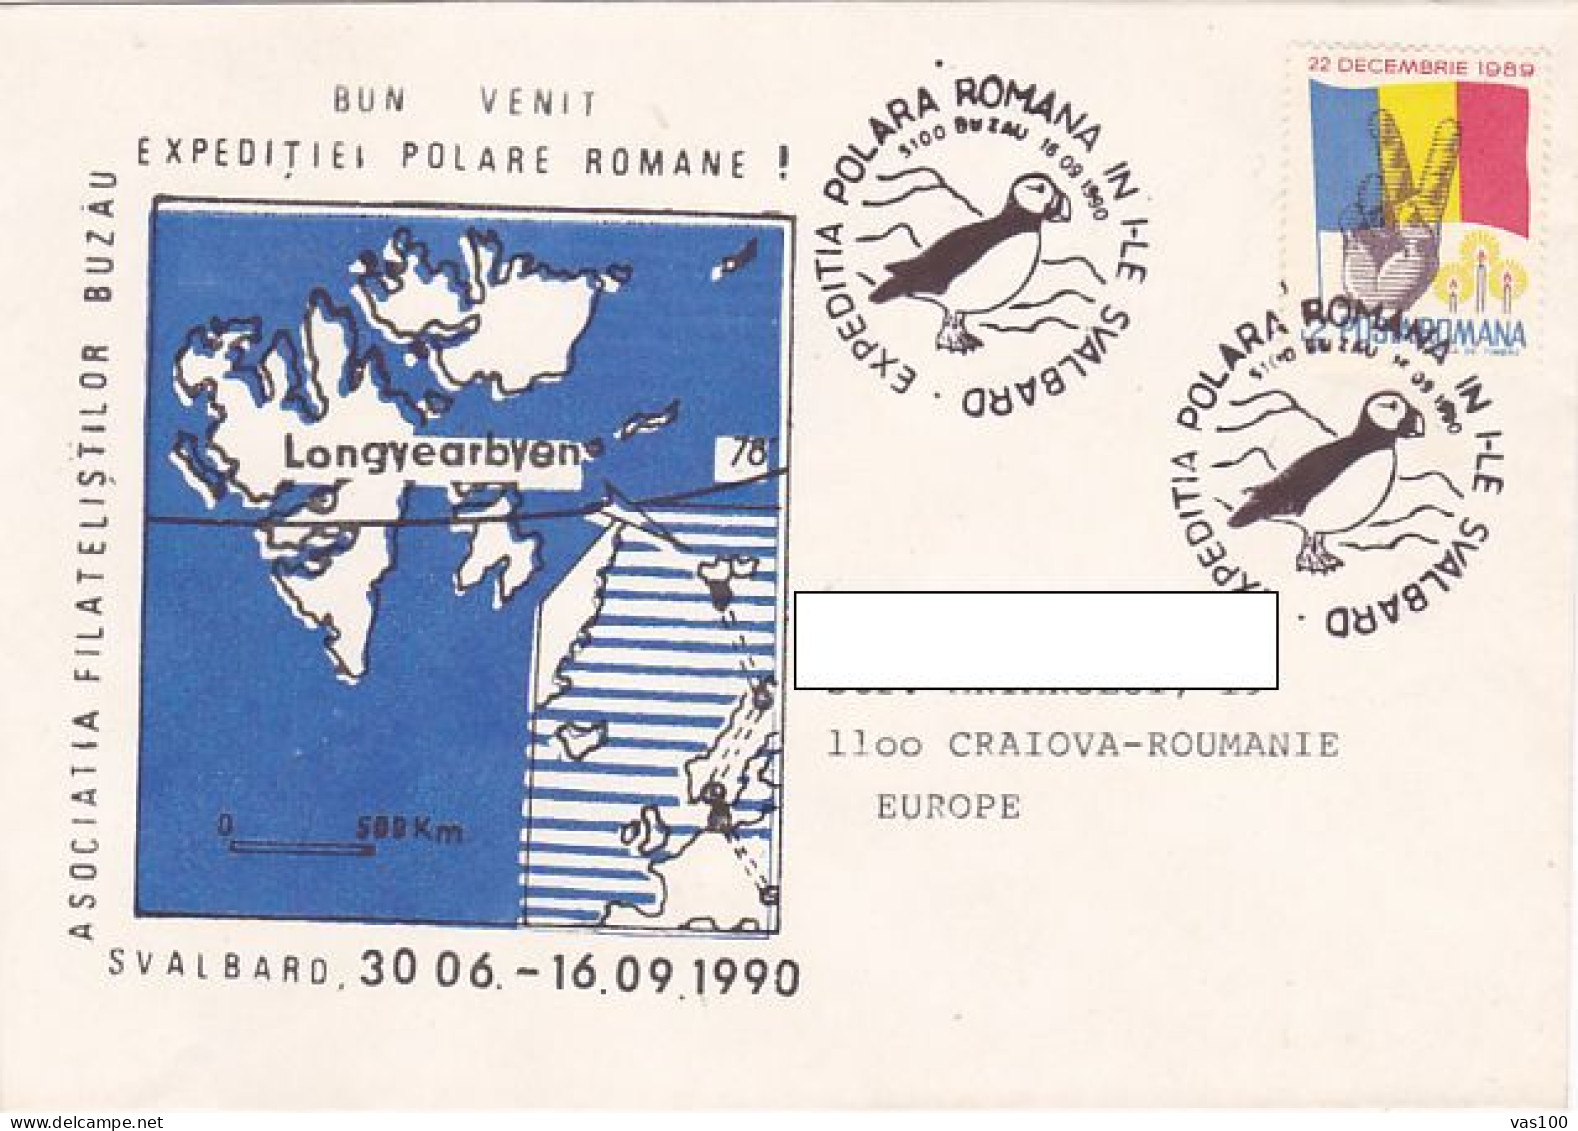 NORTH POLE, ARCTIC EXPEDITION, ROMANIAN EXPEDITION IN SVALBARD, PUFFIN, SPECIAL COVER, 1990, ROMANIA - Arctic Expeditions